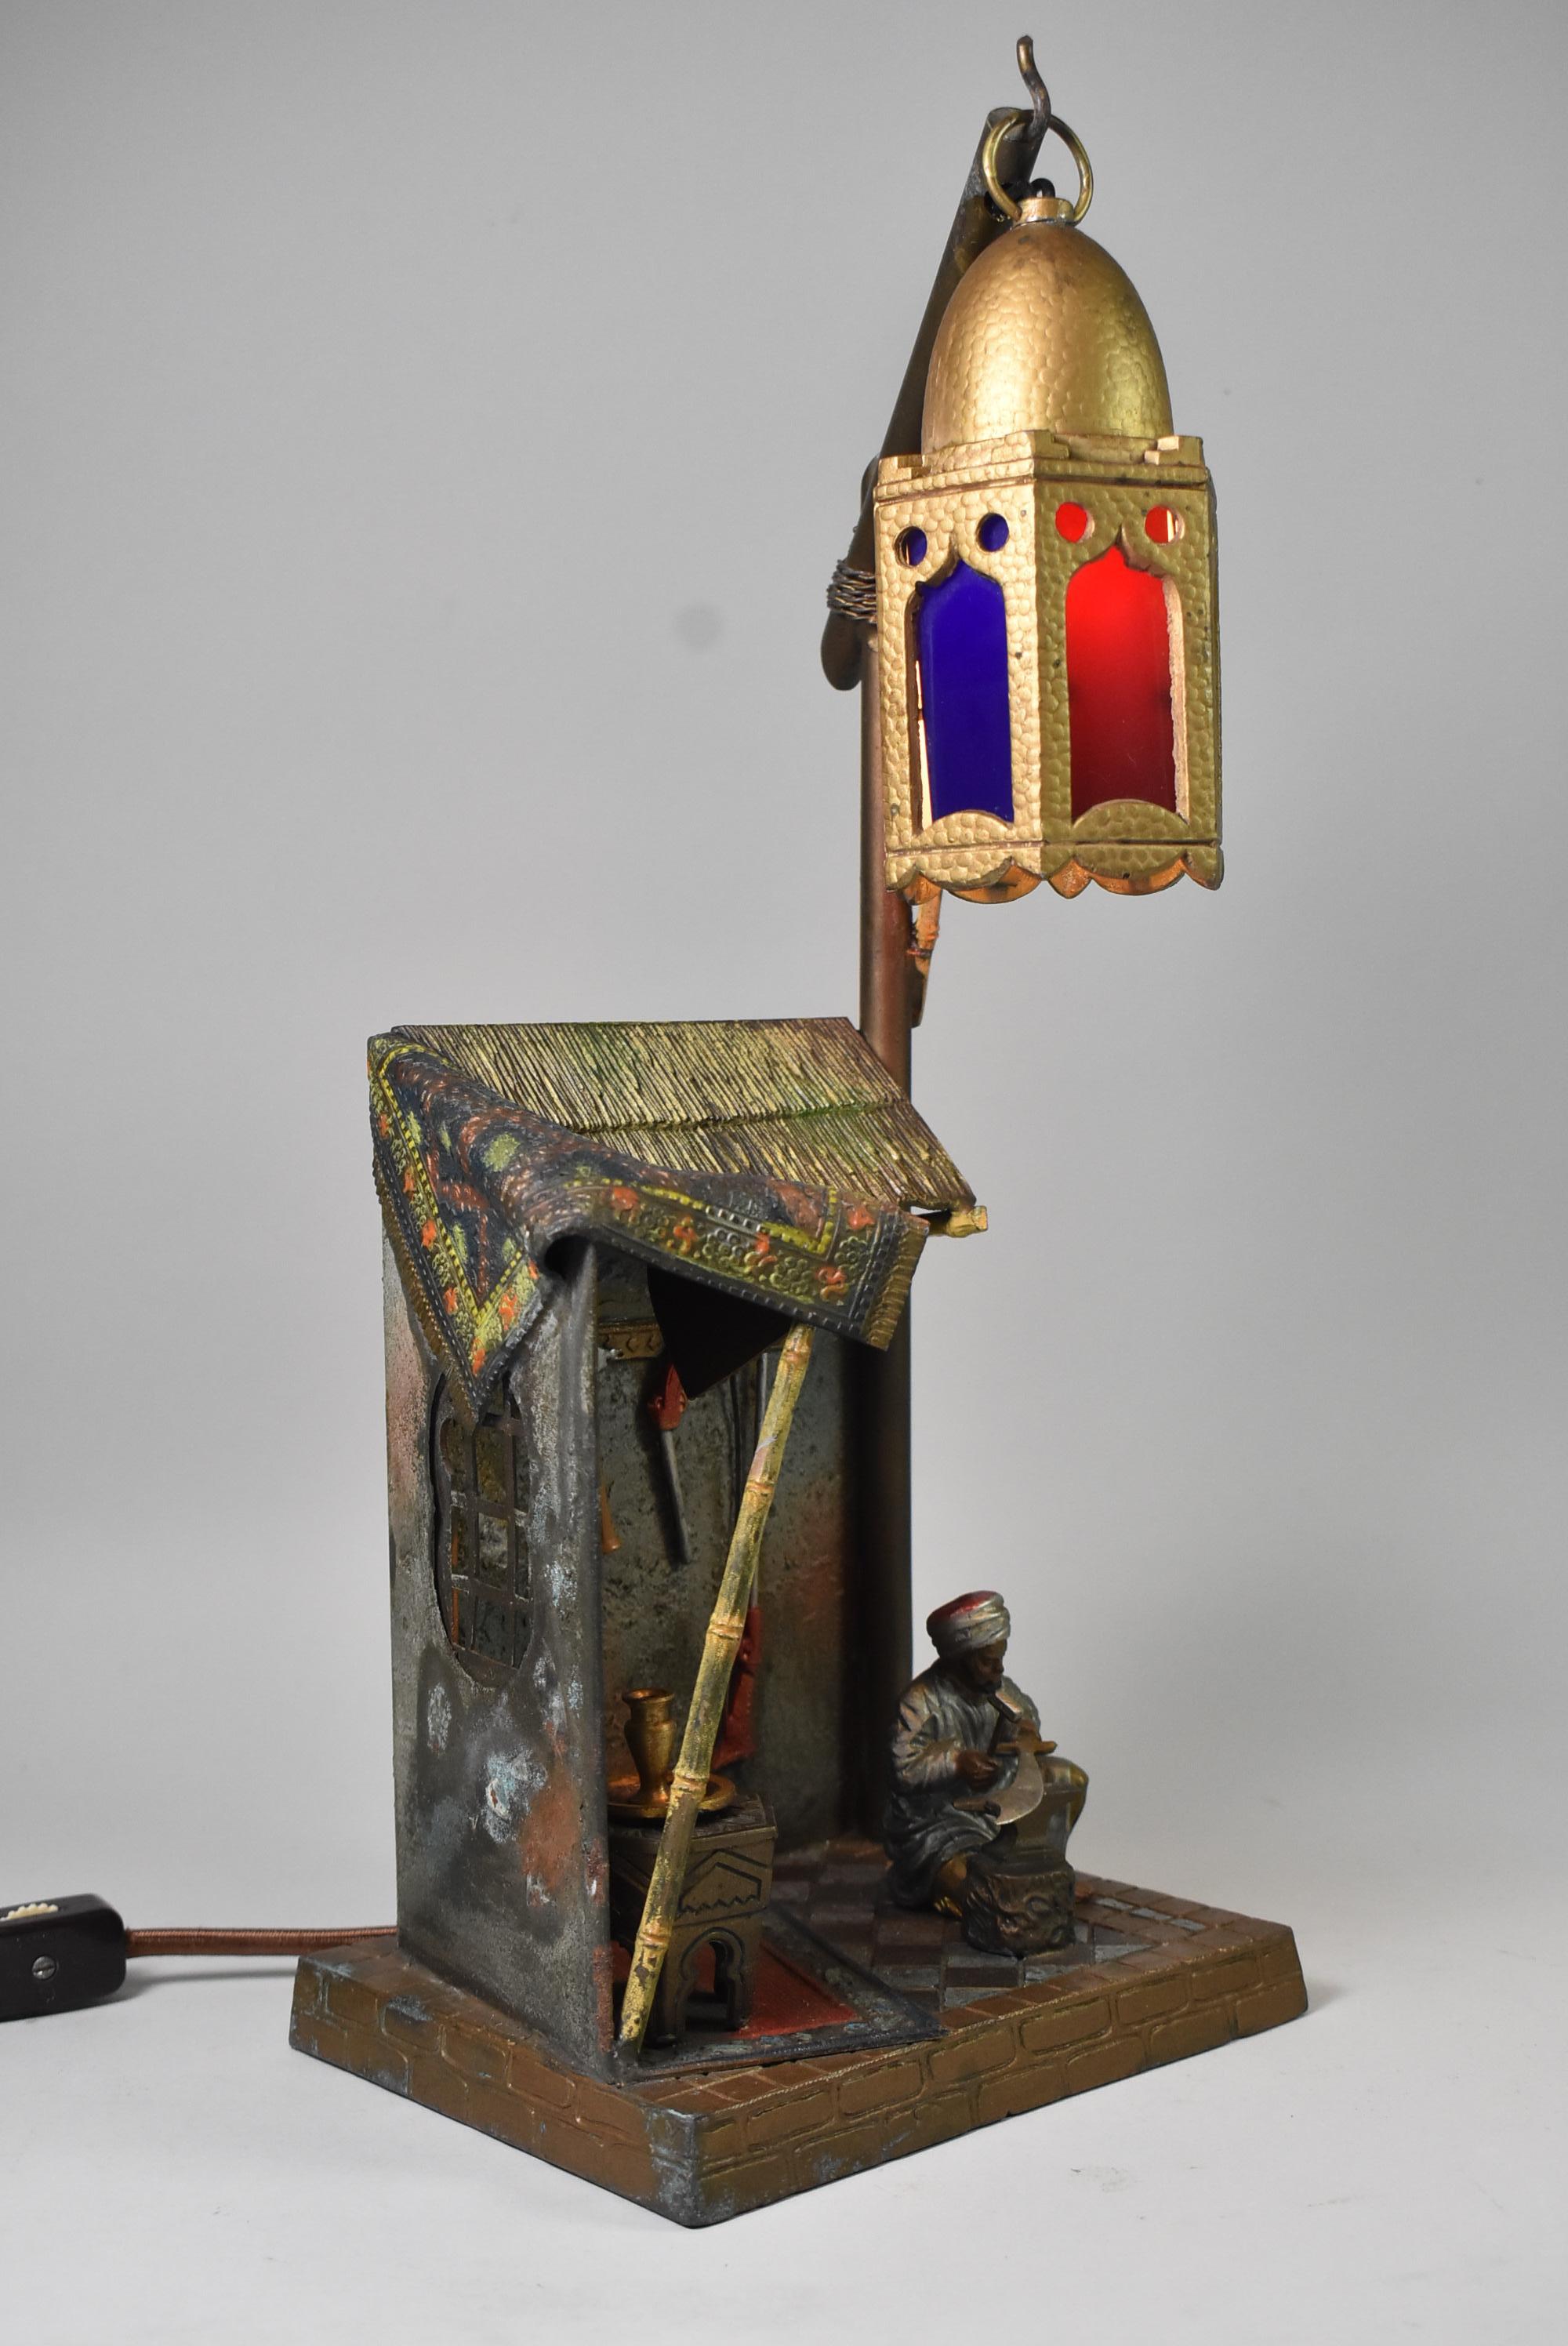 This antique Austrian table lamp is in the style of Bergman. This piece is cold painted and features an Arabian metalsmith. The single socket lantern hangs over a metalsmith's work shop where the craftsman can be seen sharpening a sword. 14 3/4